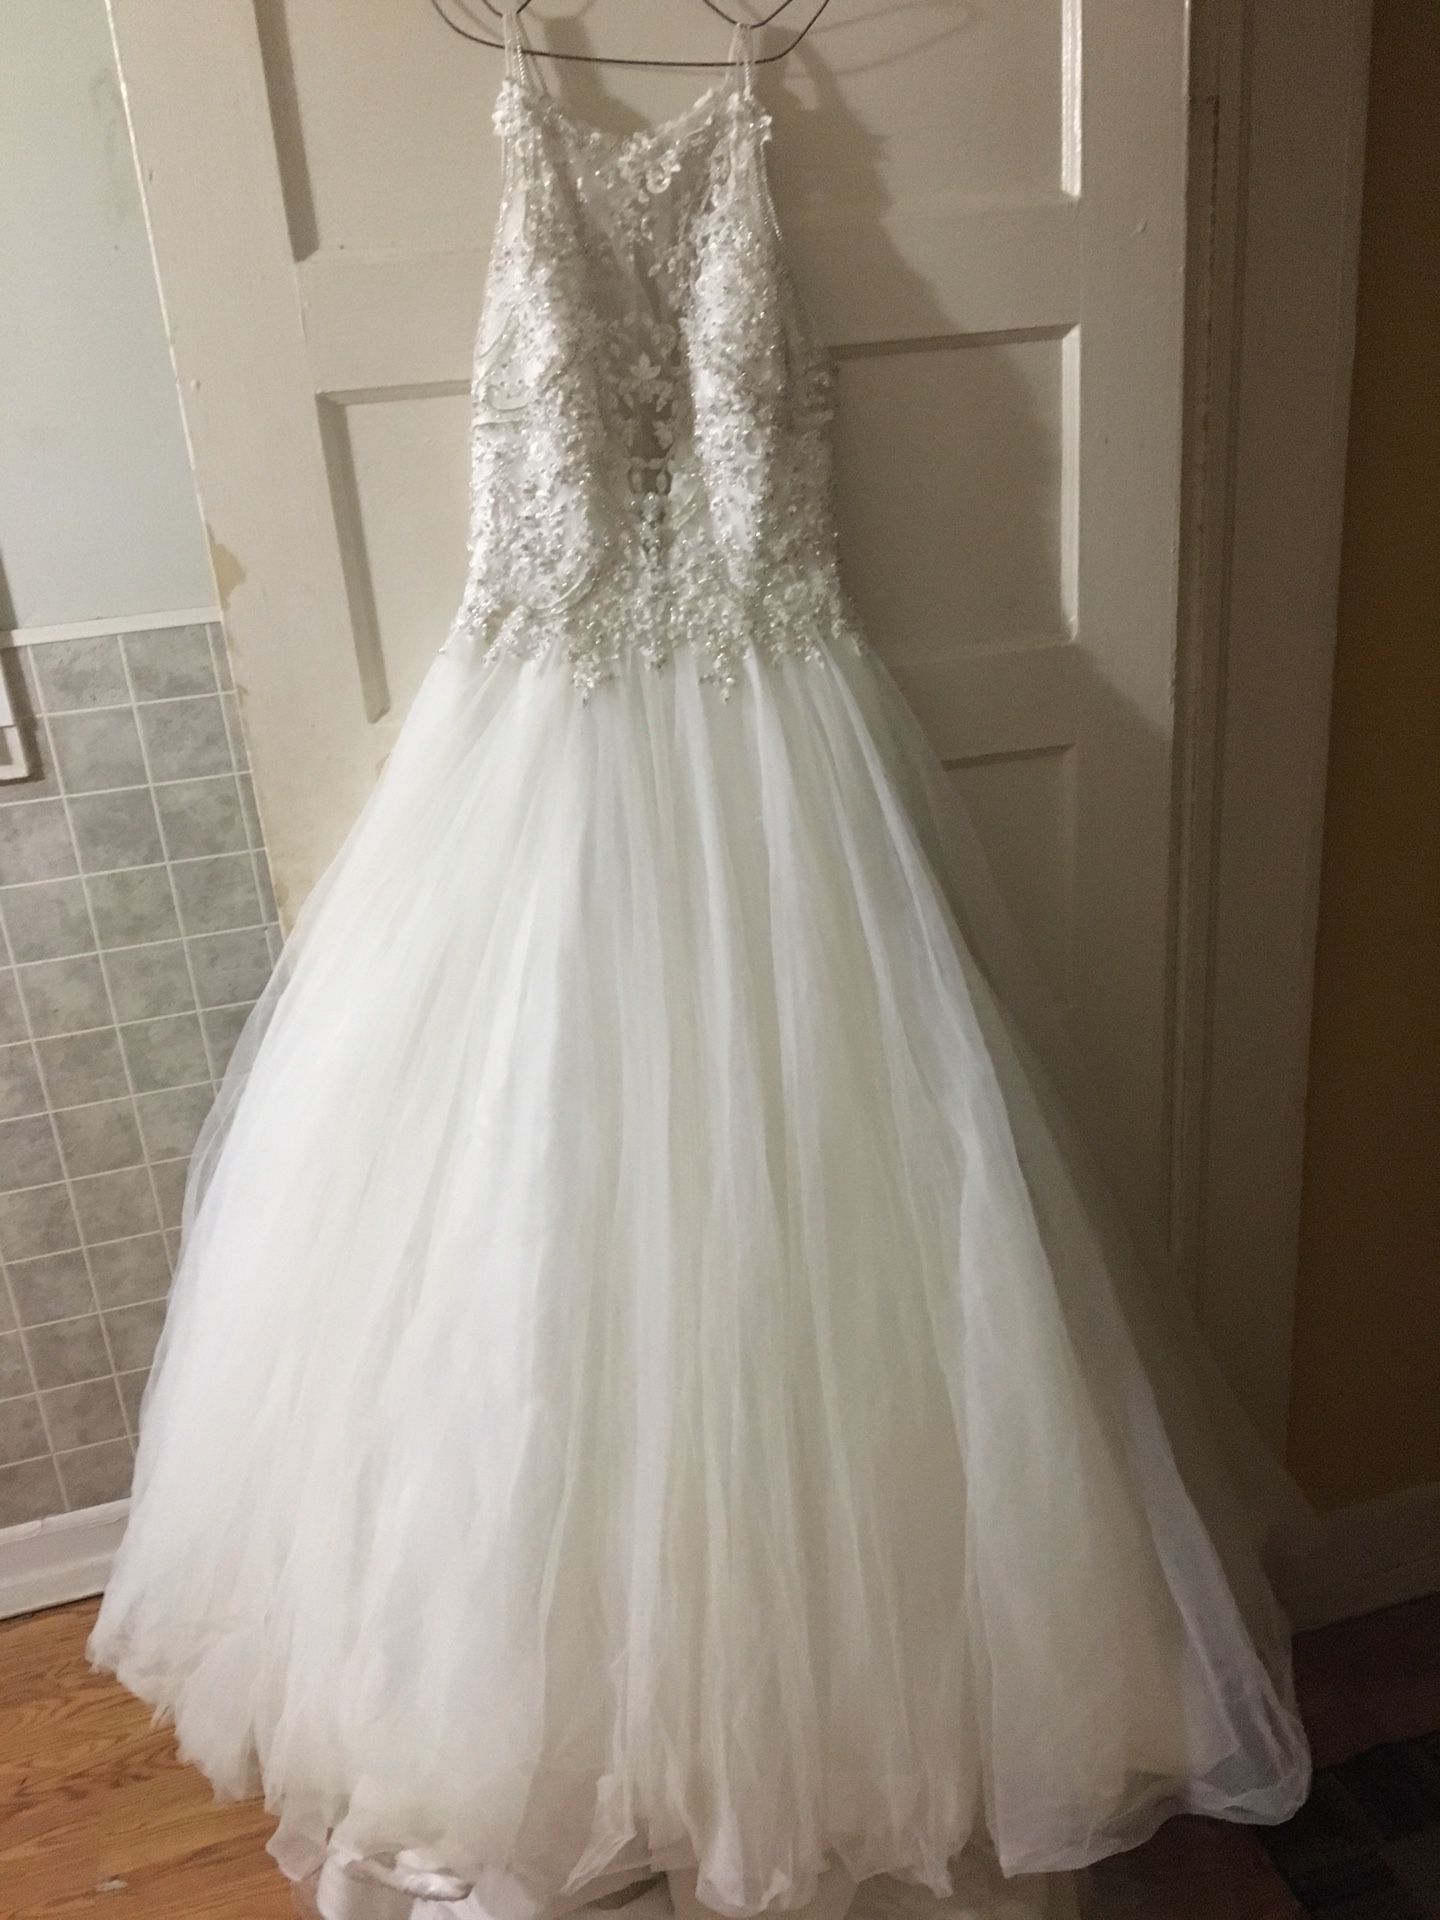 Size 8 Maggie sorrento wedding dress. Gold/ivory. Sweetheart neckline. Long train. Used in mint condition.